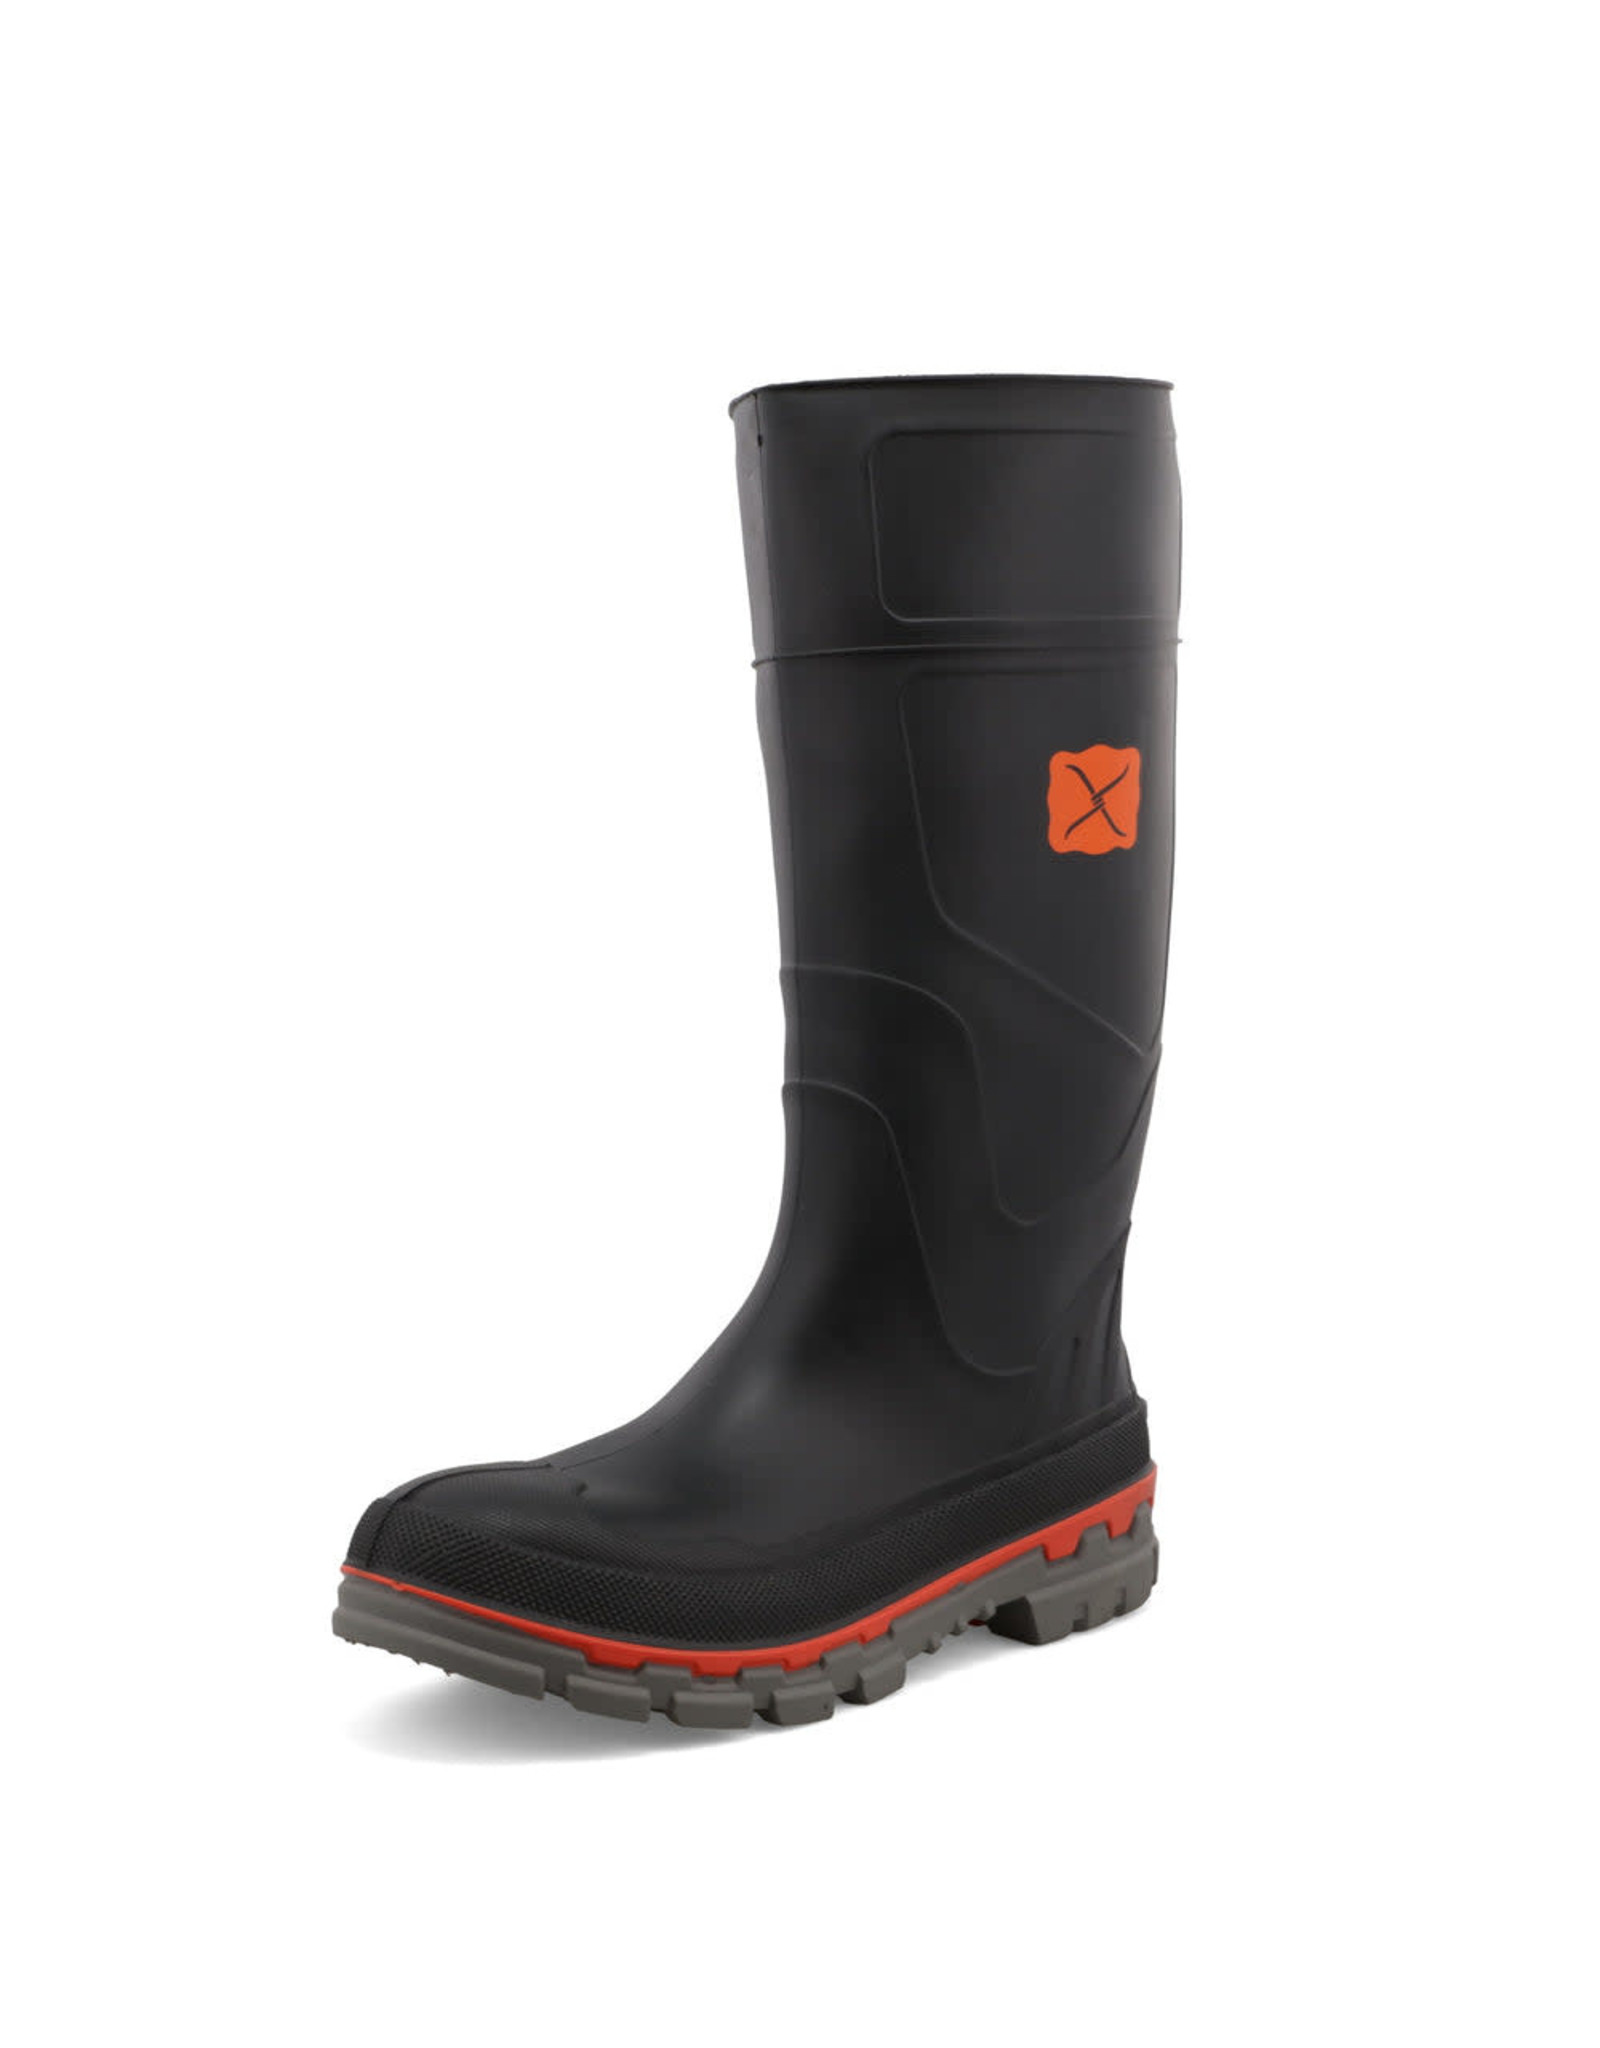 Twisted X Men's Steel Toe Mud MWBS002 Safety Toe Rubber Boots - DISCONTINUED